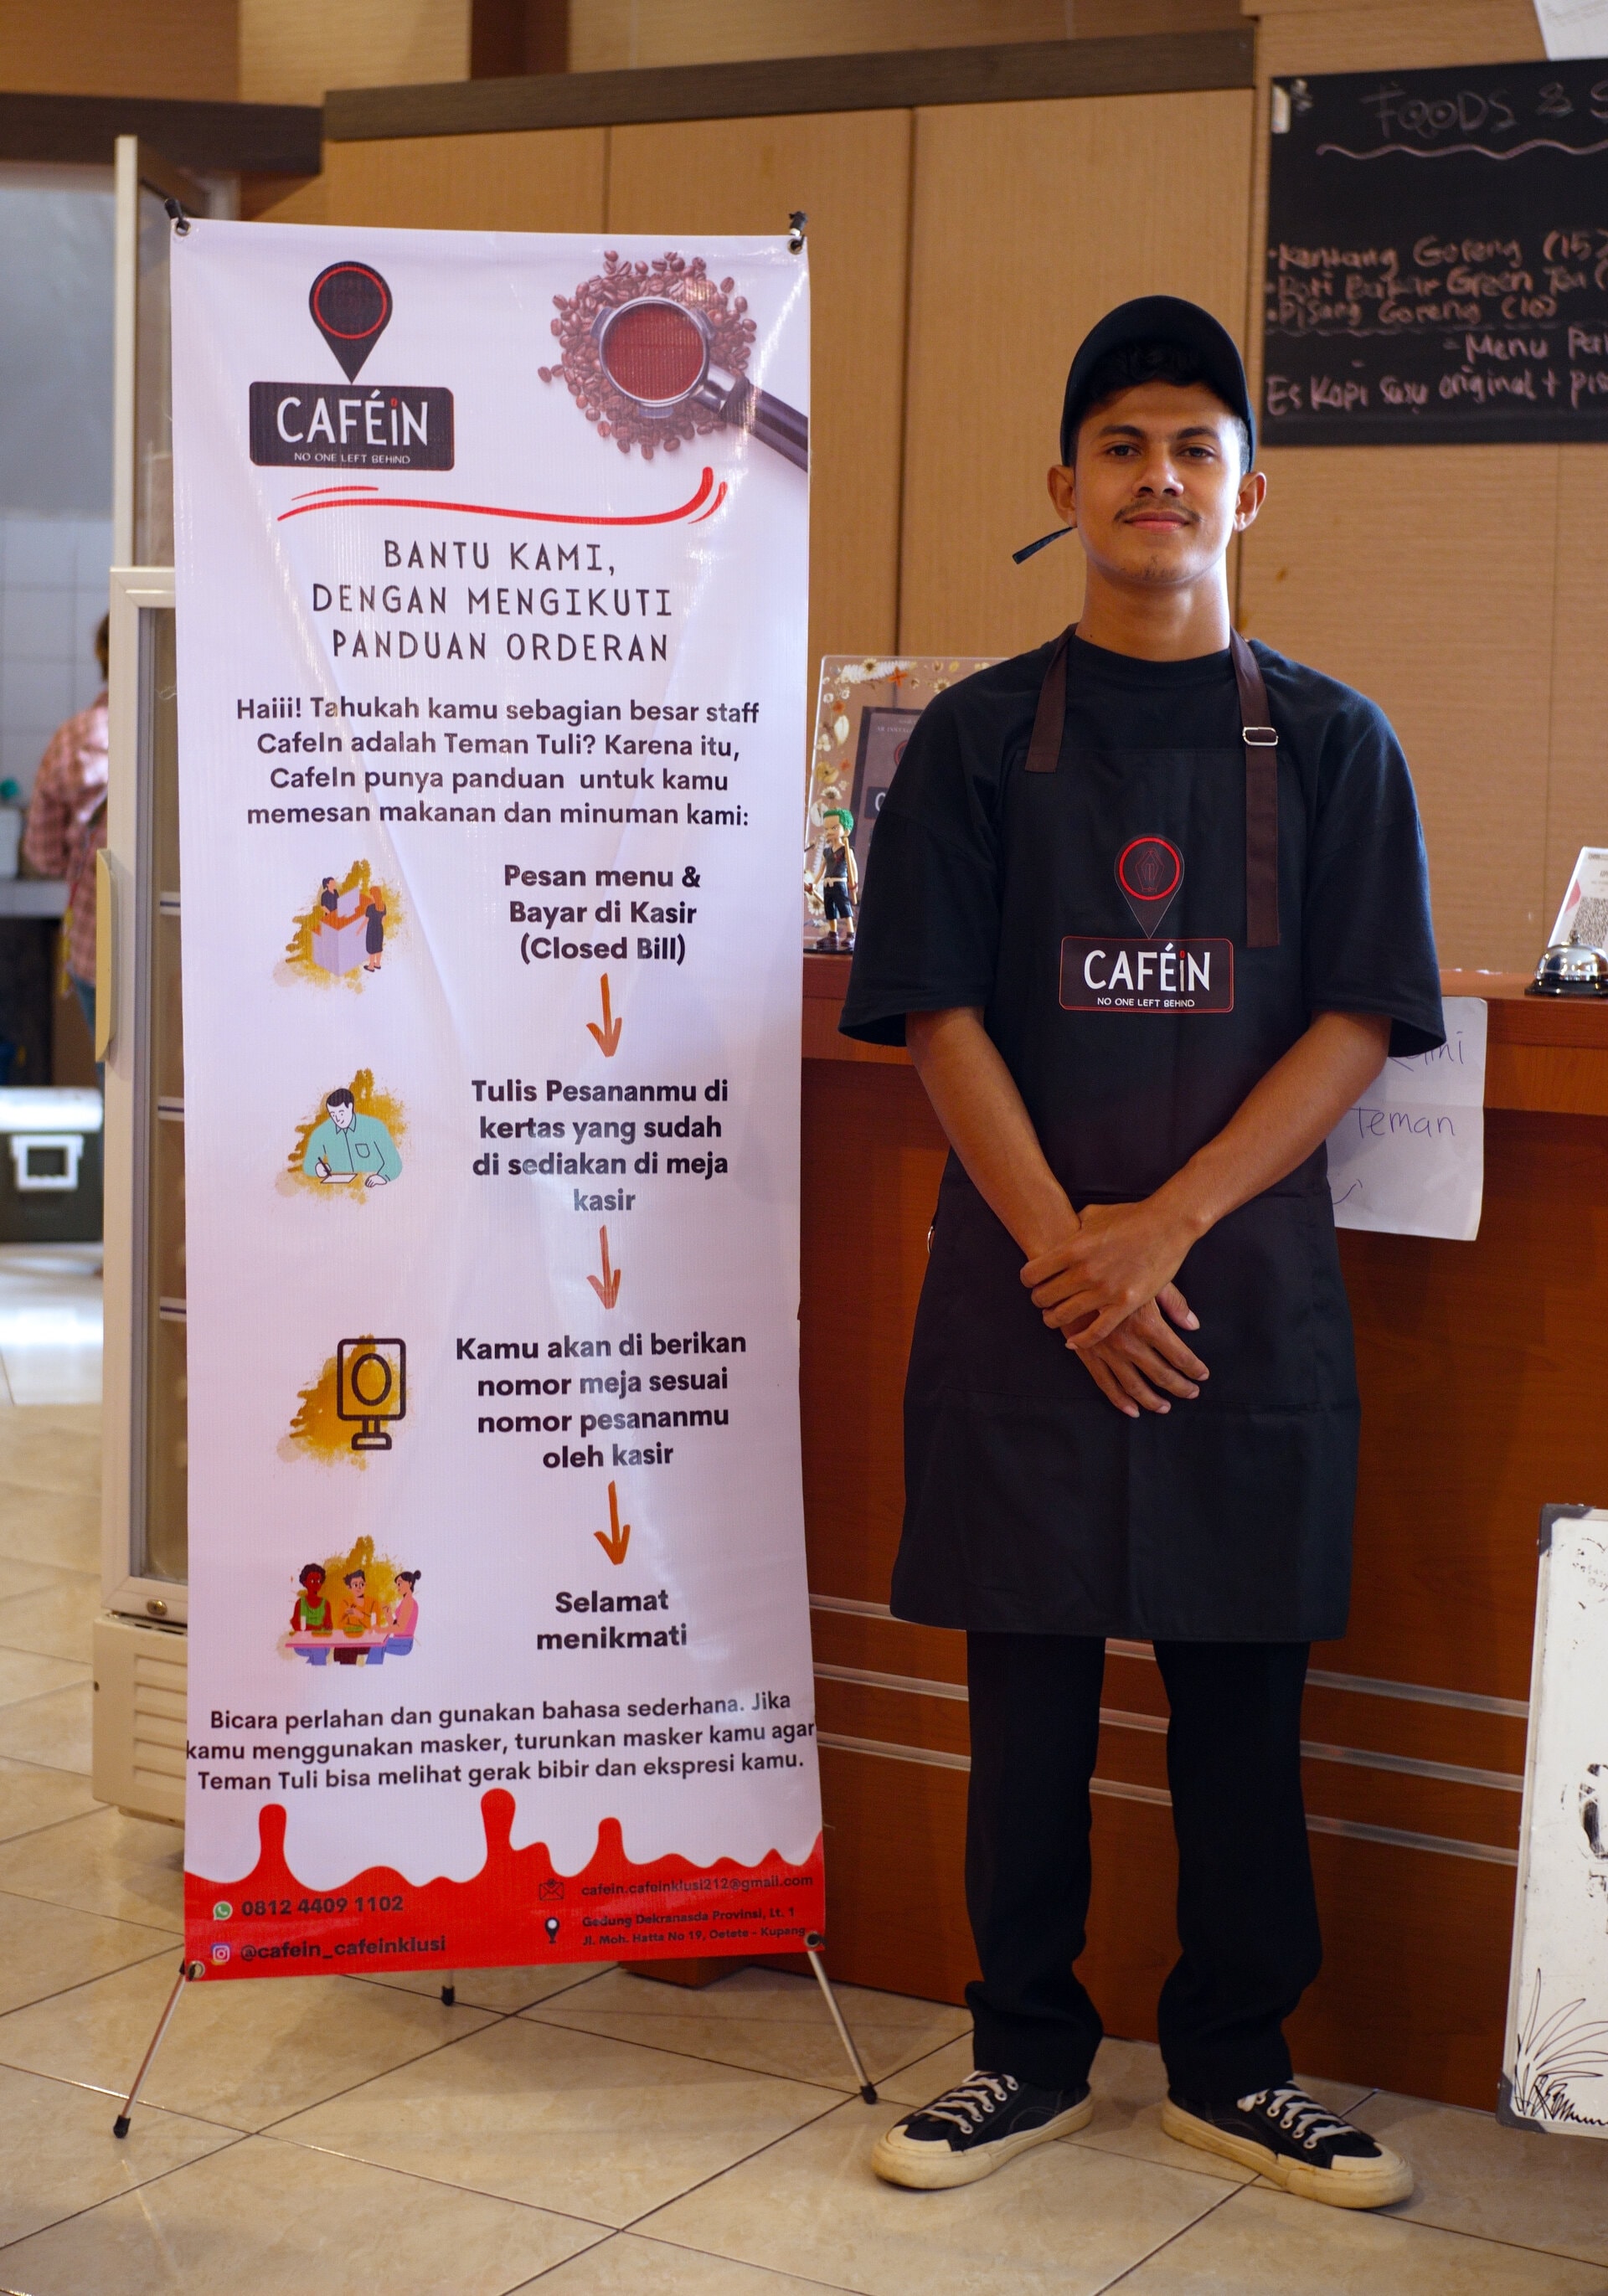 Barista Doni Kopong standing by a banner which advises customers at CafeIn: to order in writing at the cashier, pay up front, and take off their masks to allow deaf staff to lip read. 